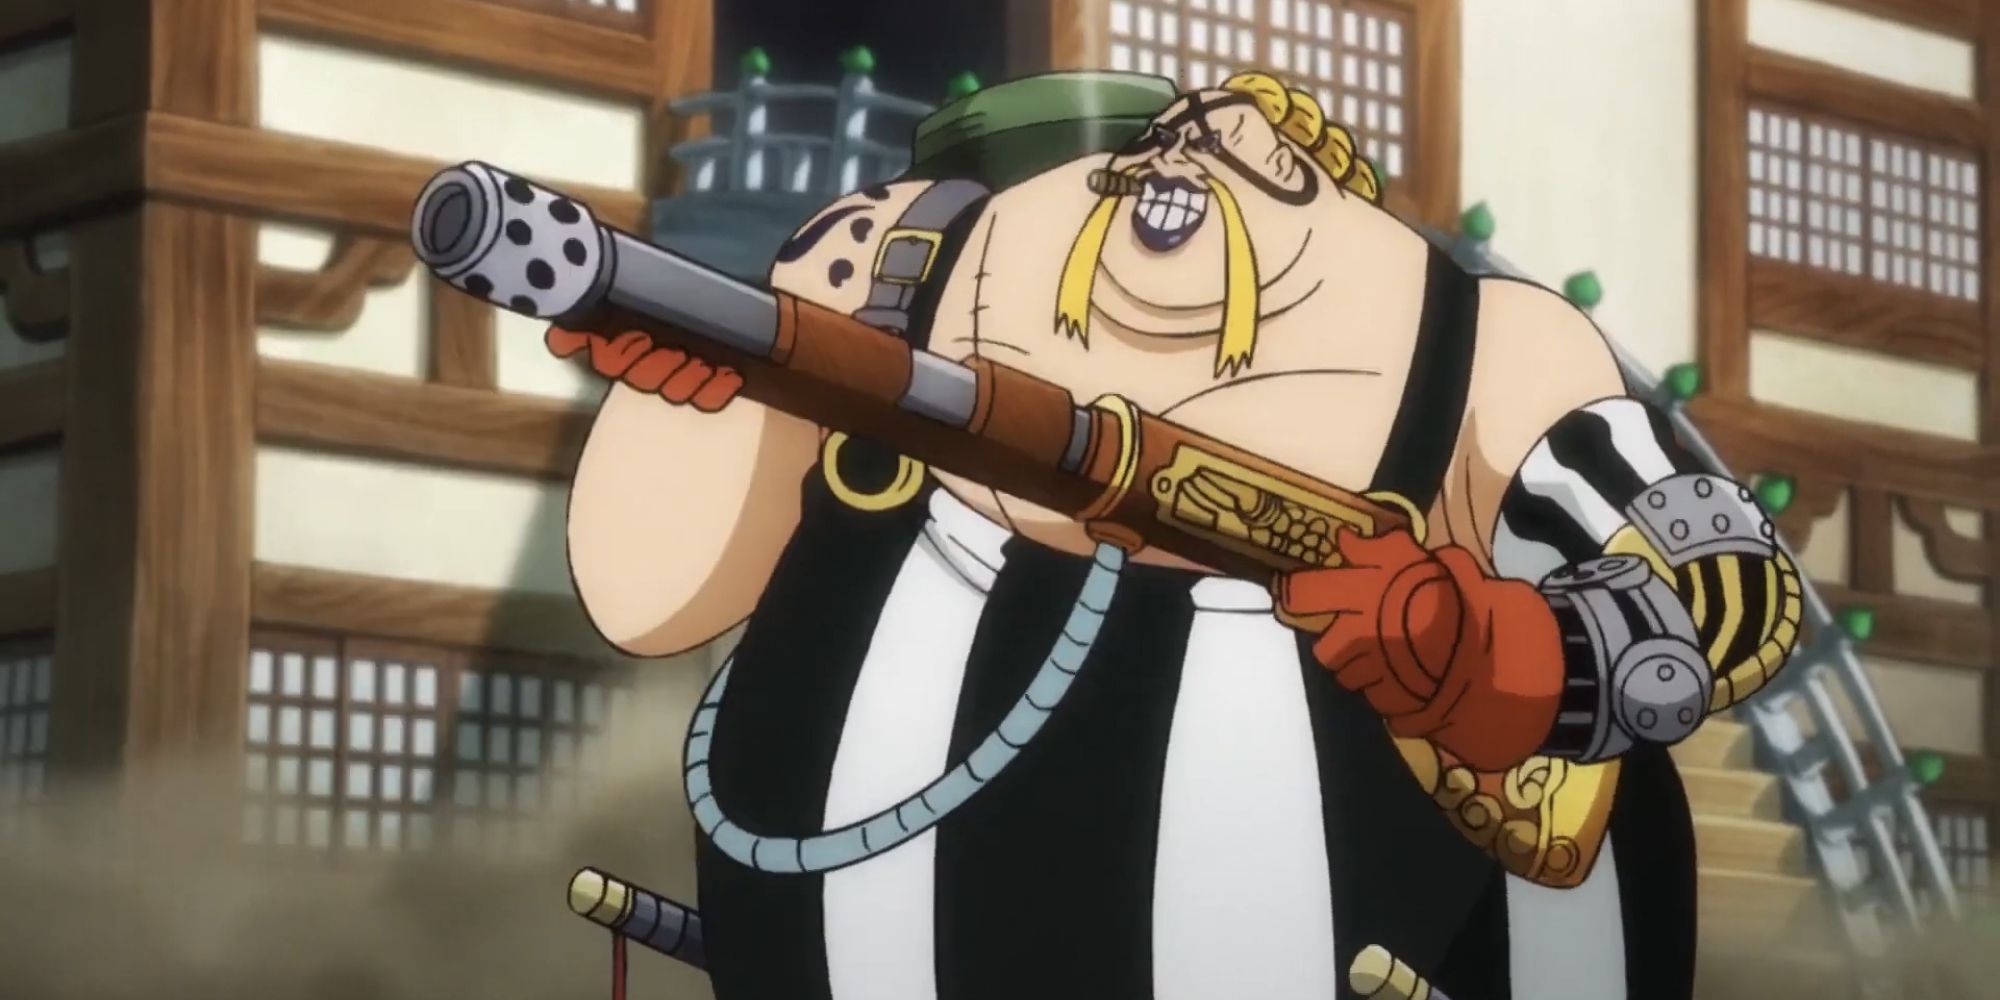 Queen in One Piece anime